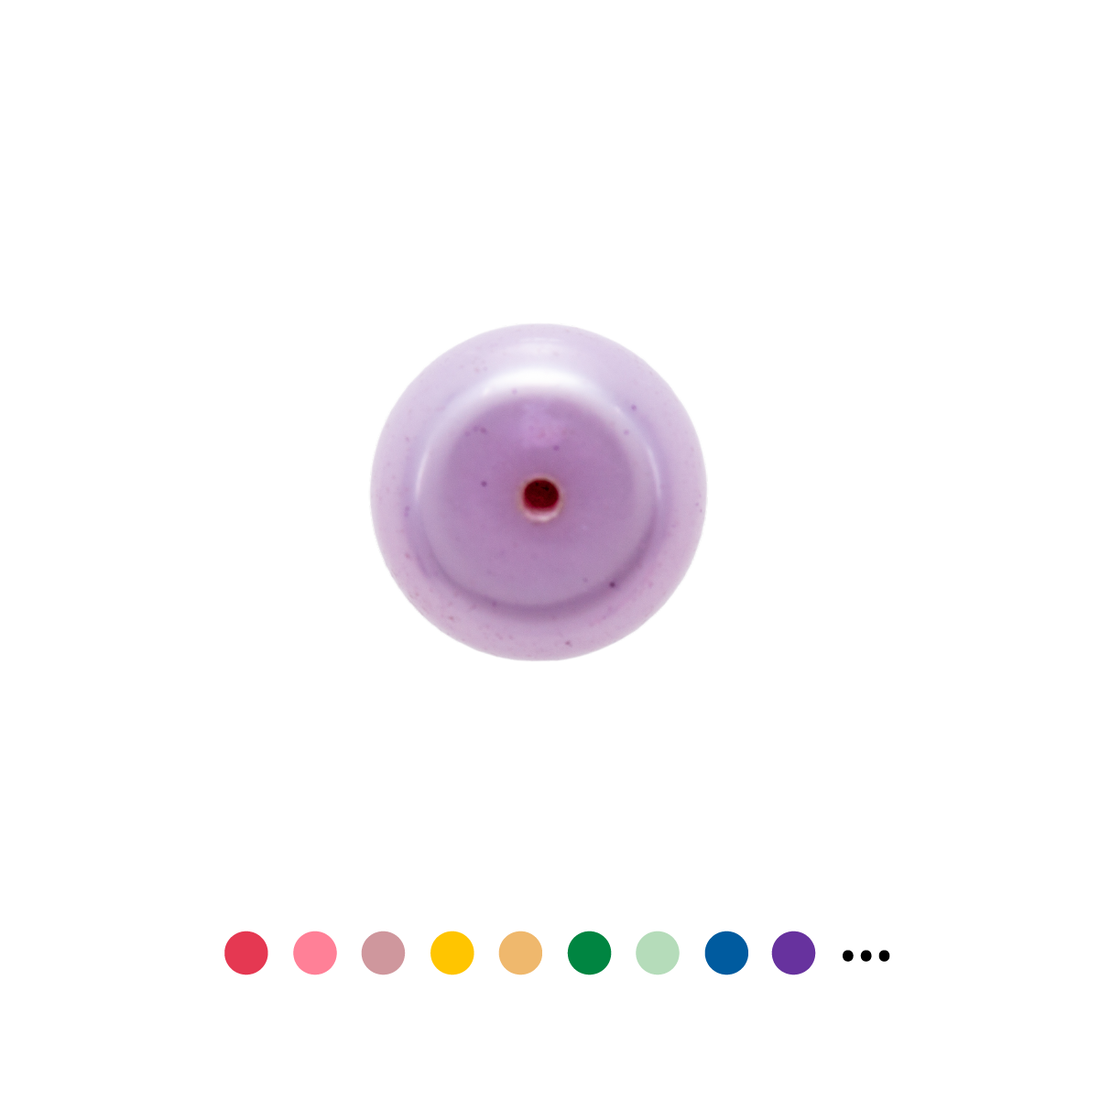 Loose Pearl Button Shaped with Flat Bottom 8-10mm PreDrilled